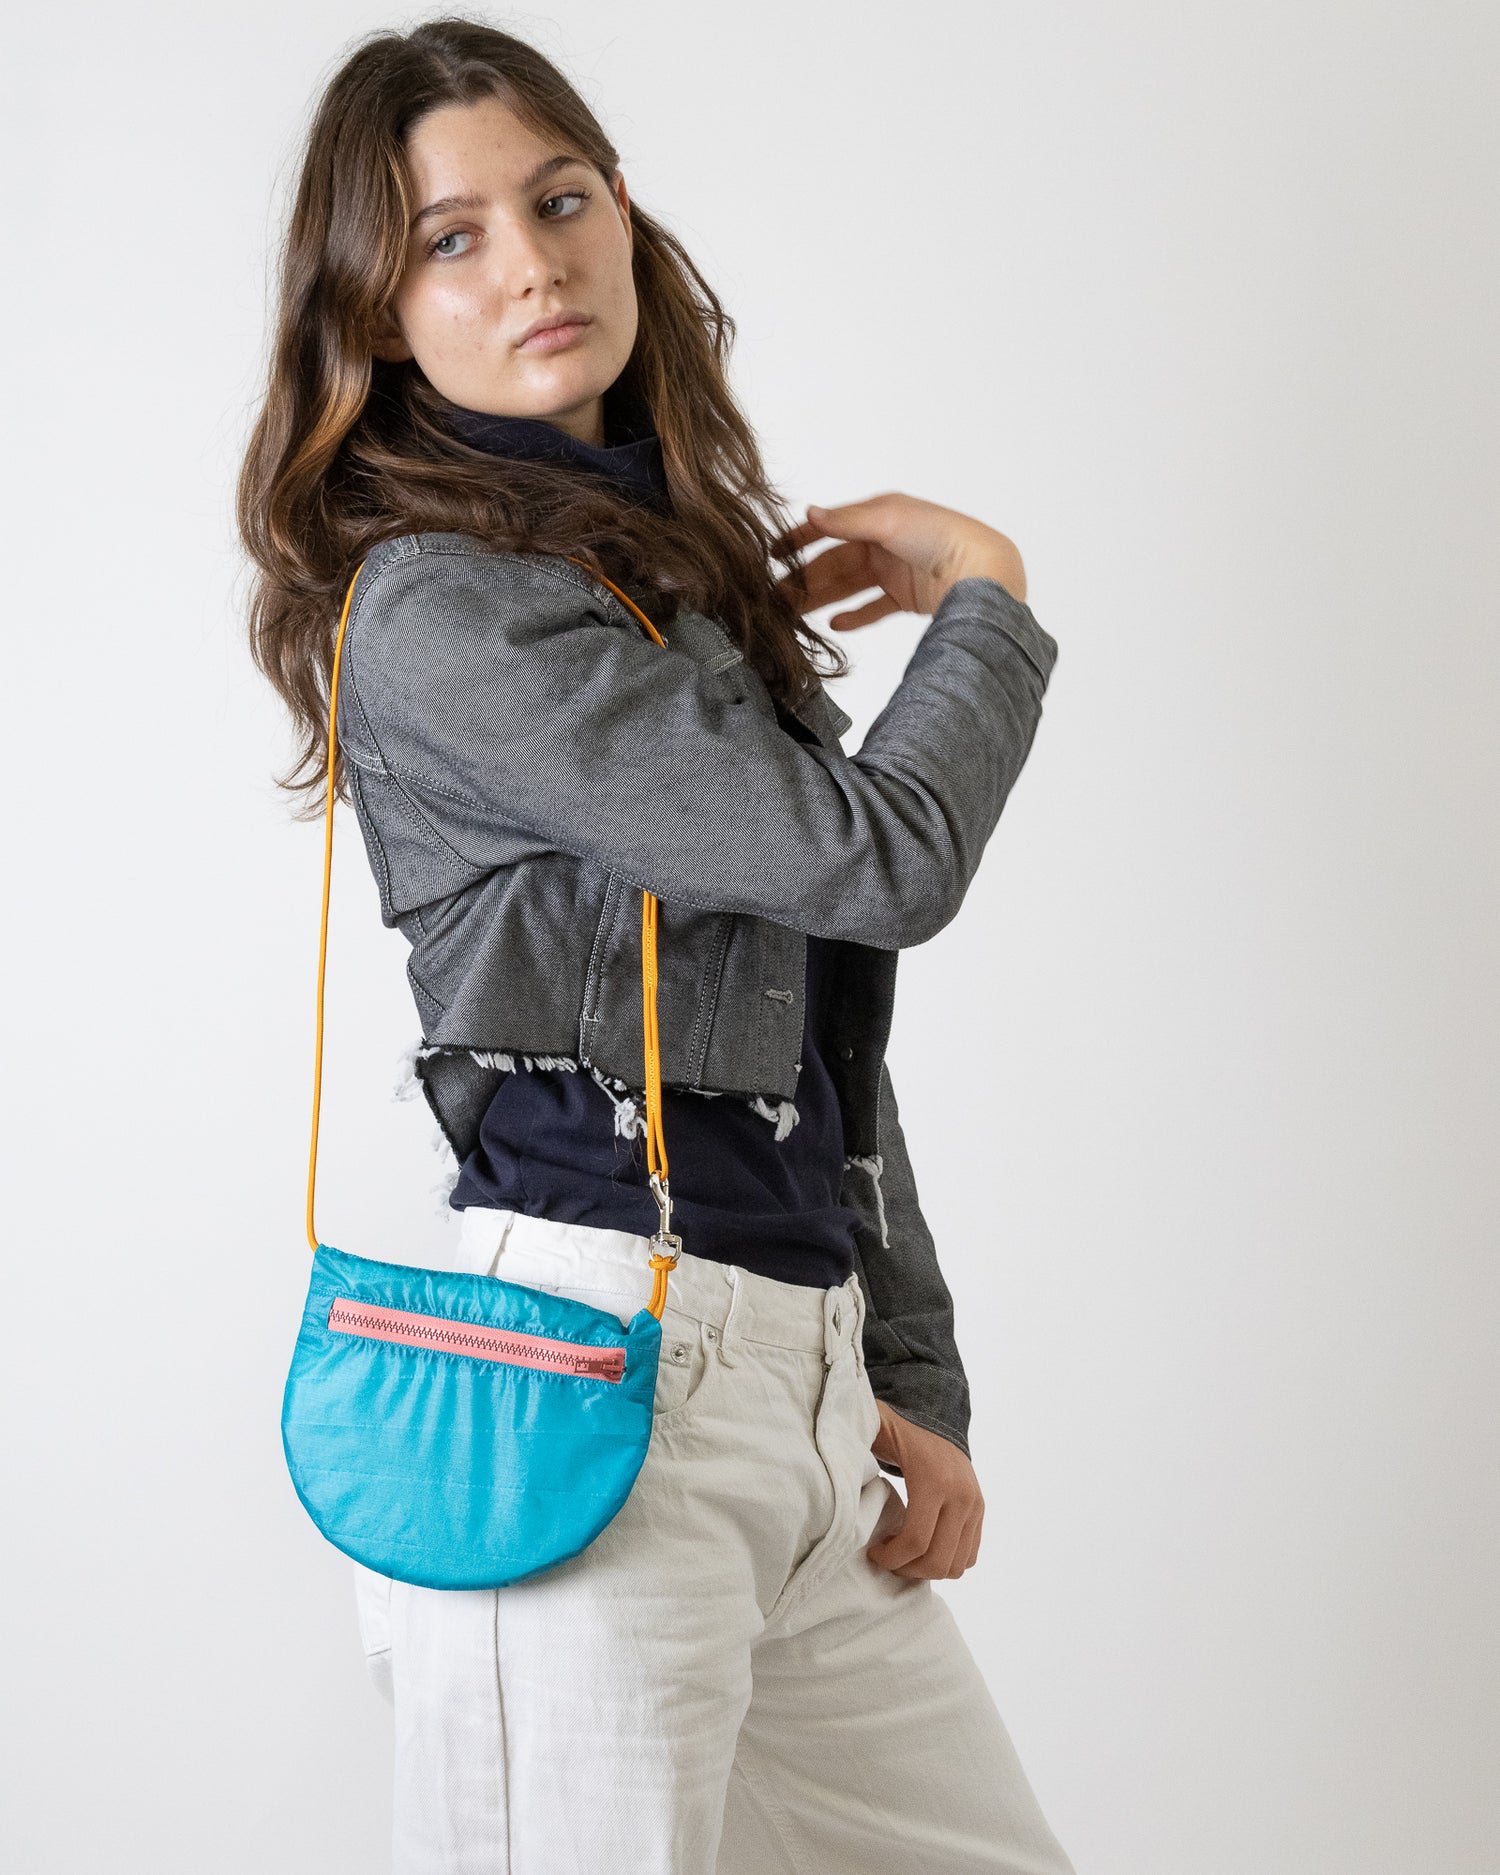 Model wears teal cross body bag with dusty rose zipper made from upcycled paraglider nylon U.BAG